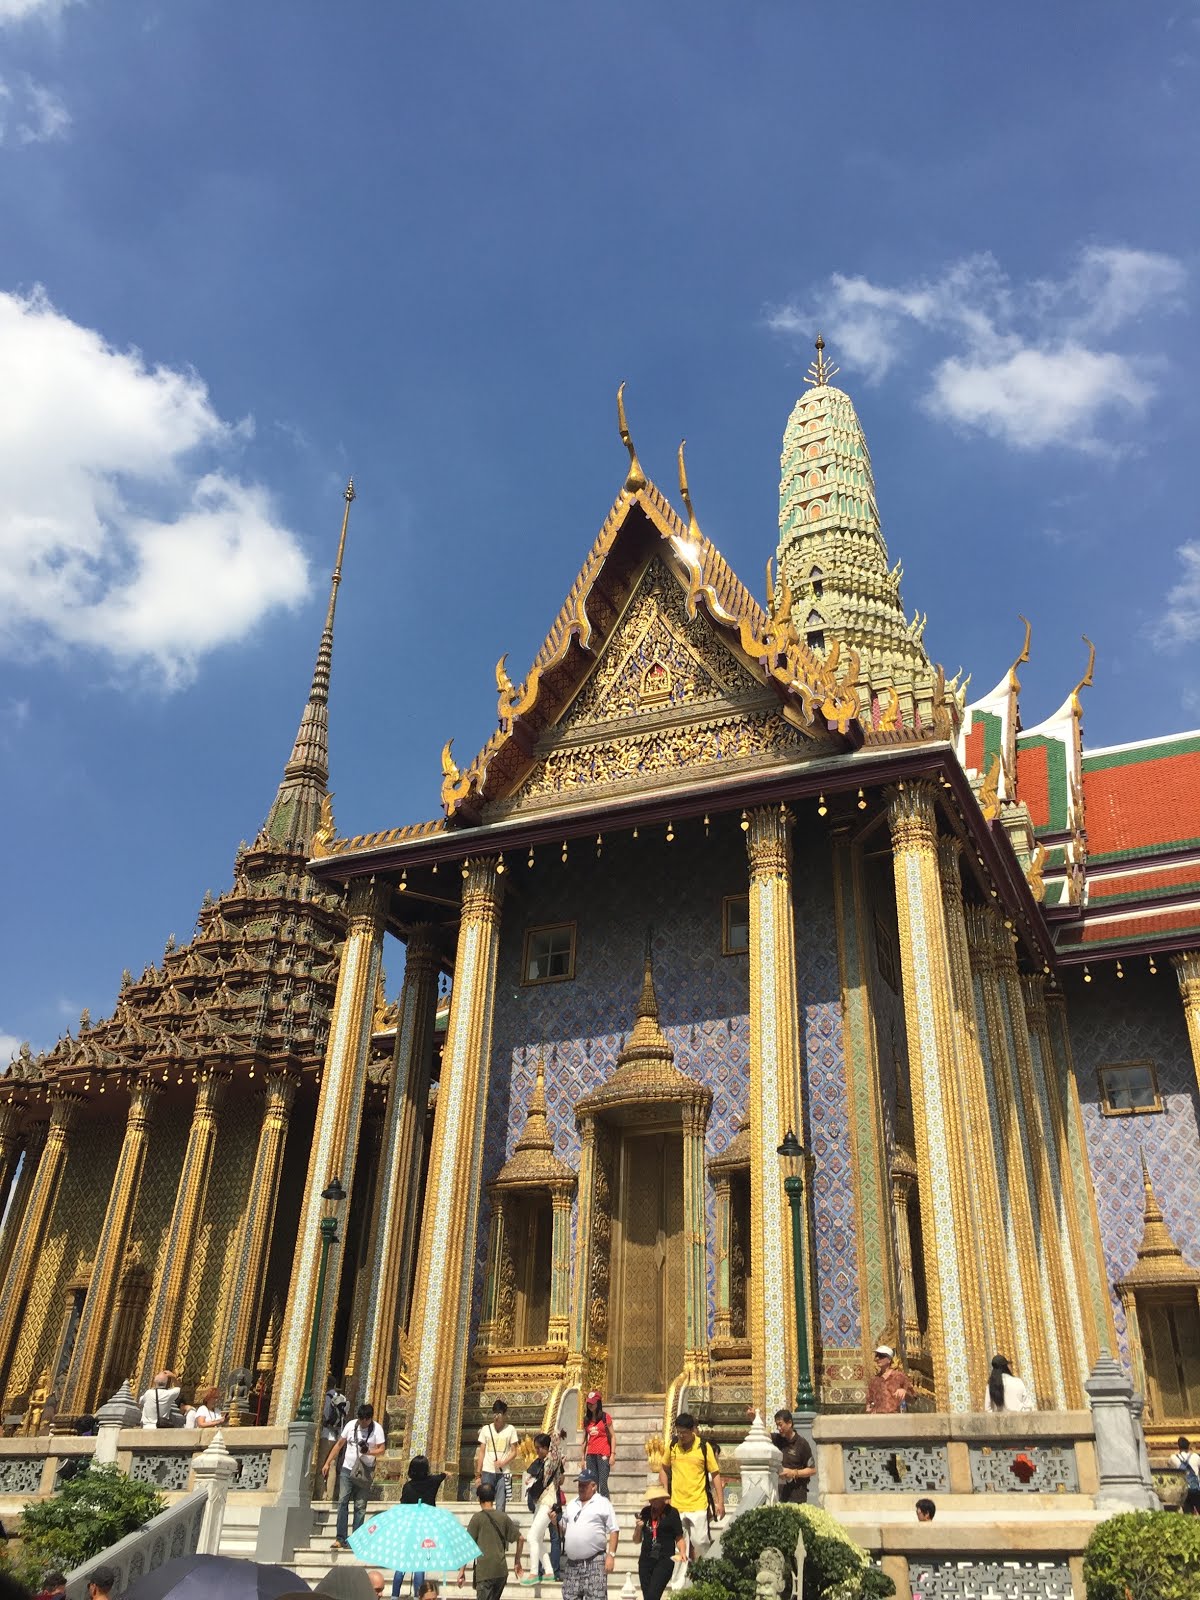 The intricate Grand Palace in Bangkok, Thailand